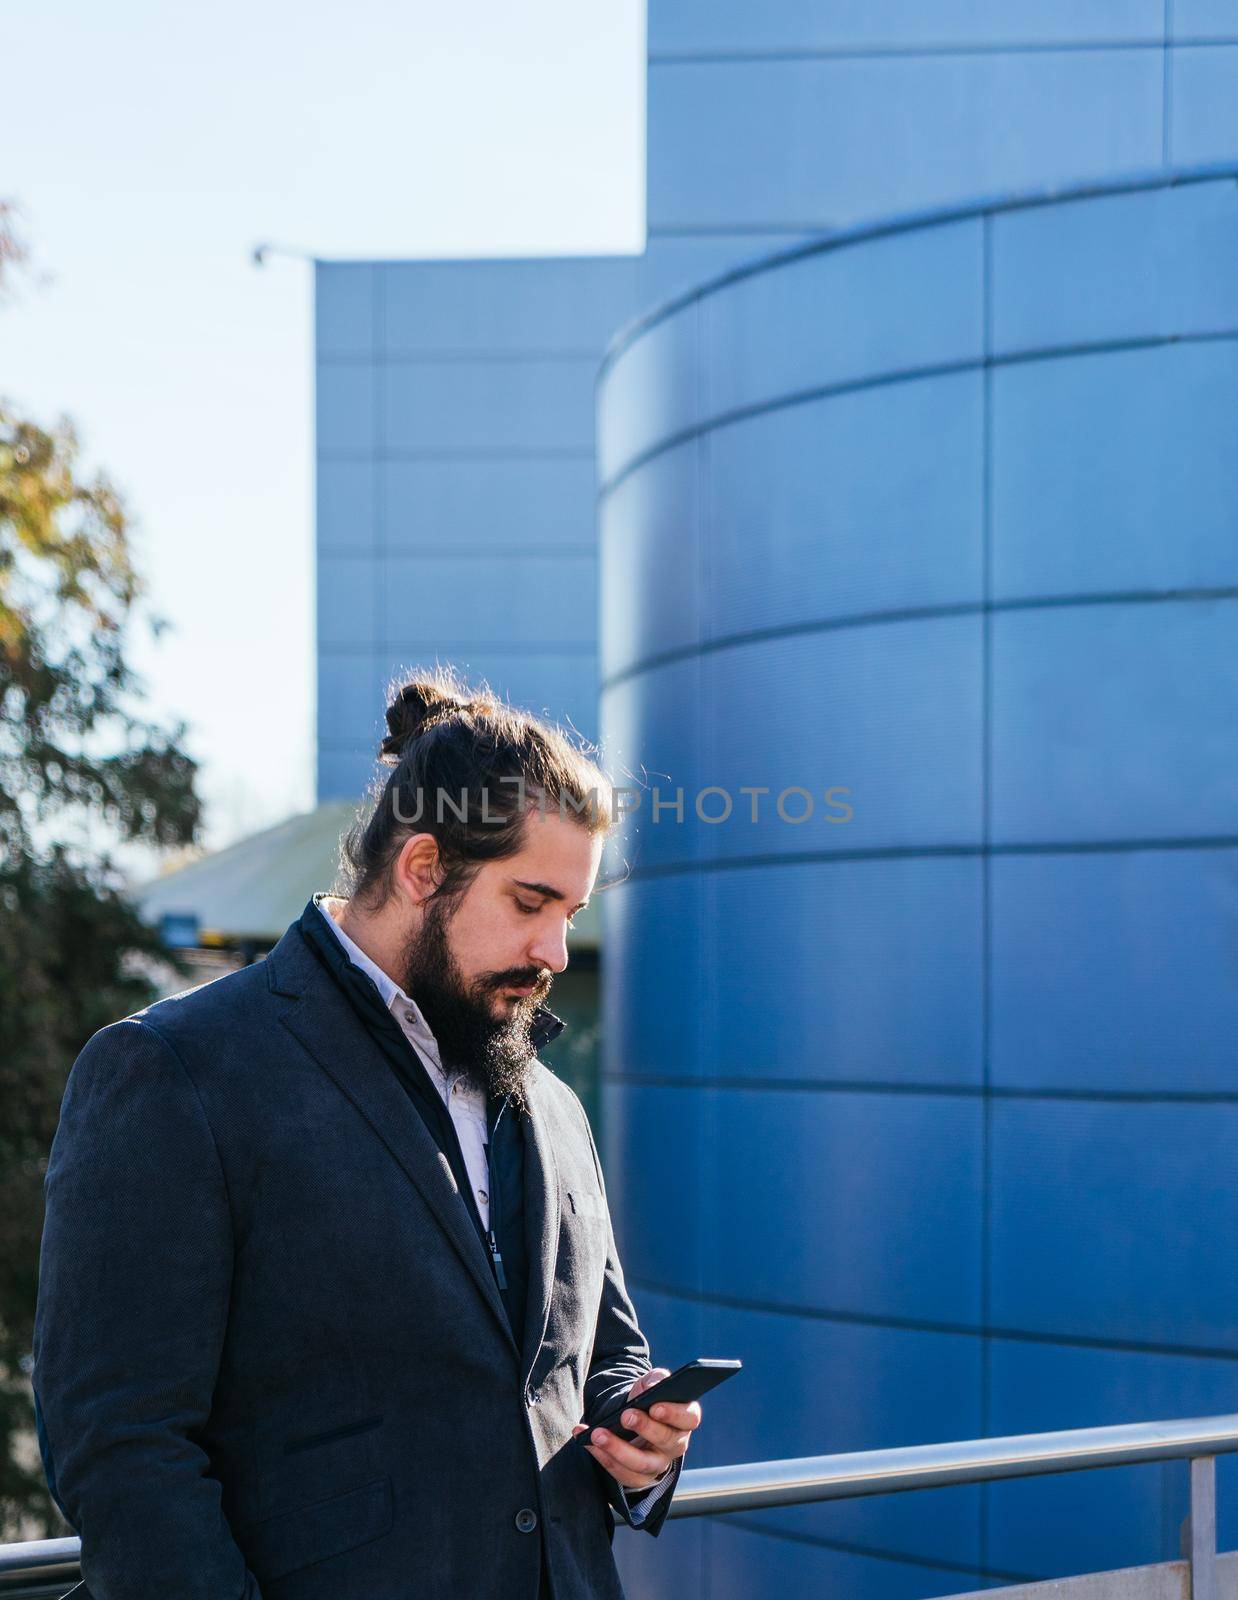 Young businessman with long hair and beard looking smartphone during his work break, on the street next to the offices. Vertical photo on a sunny and clear day.